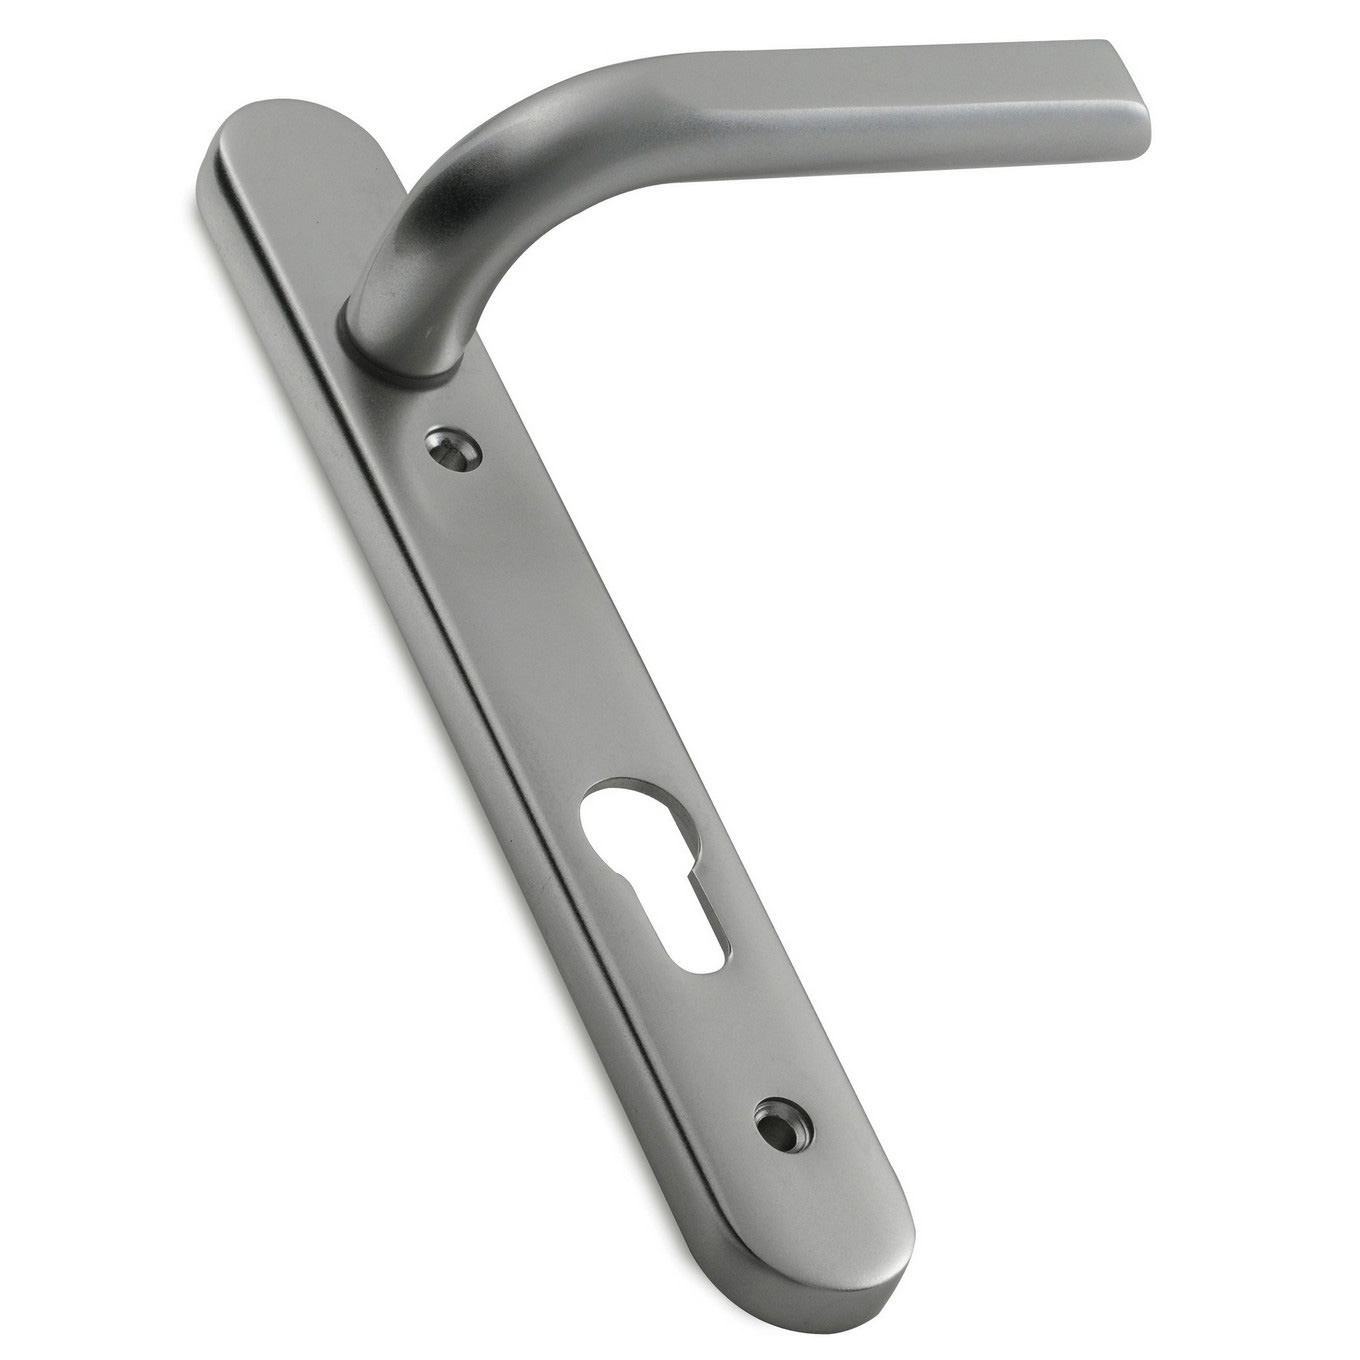 IM10010 Image Multipoint Door Handle, 220mm Long Plate, Unsprung